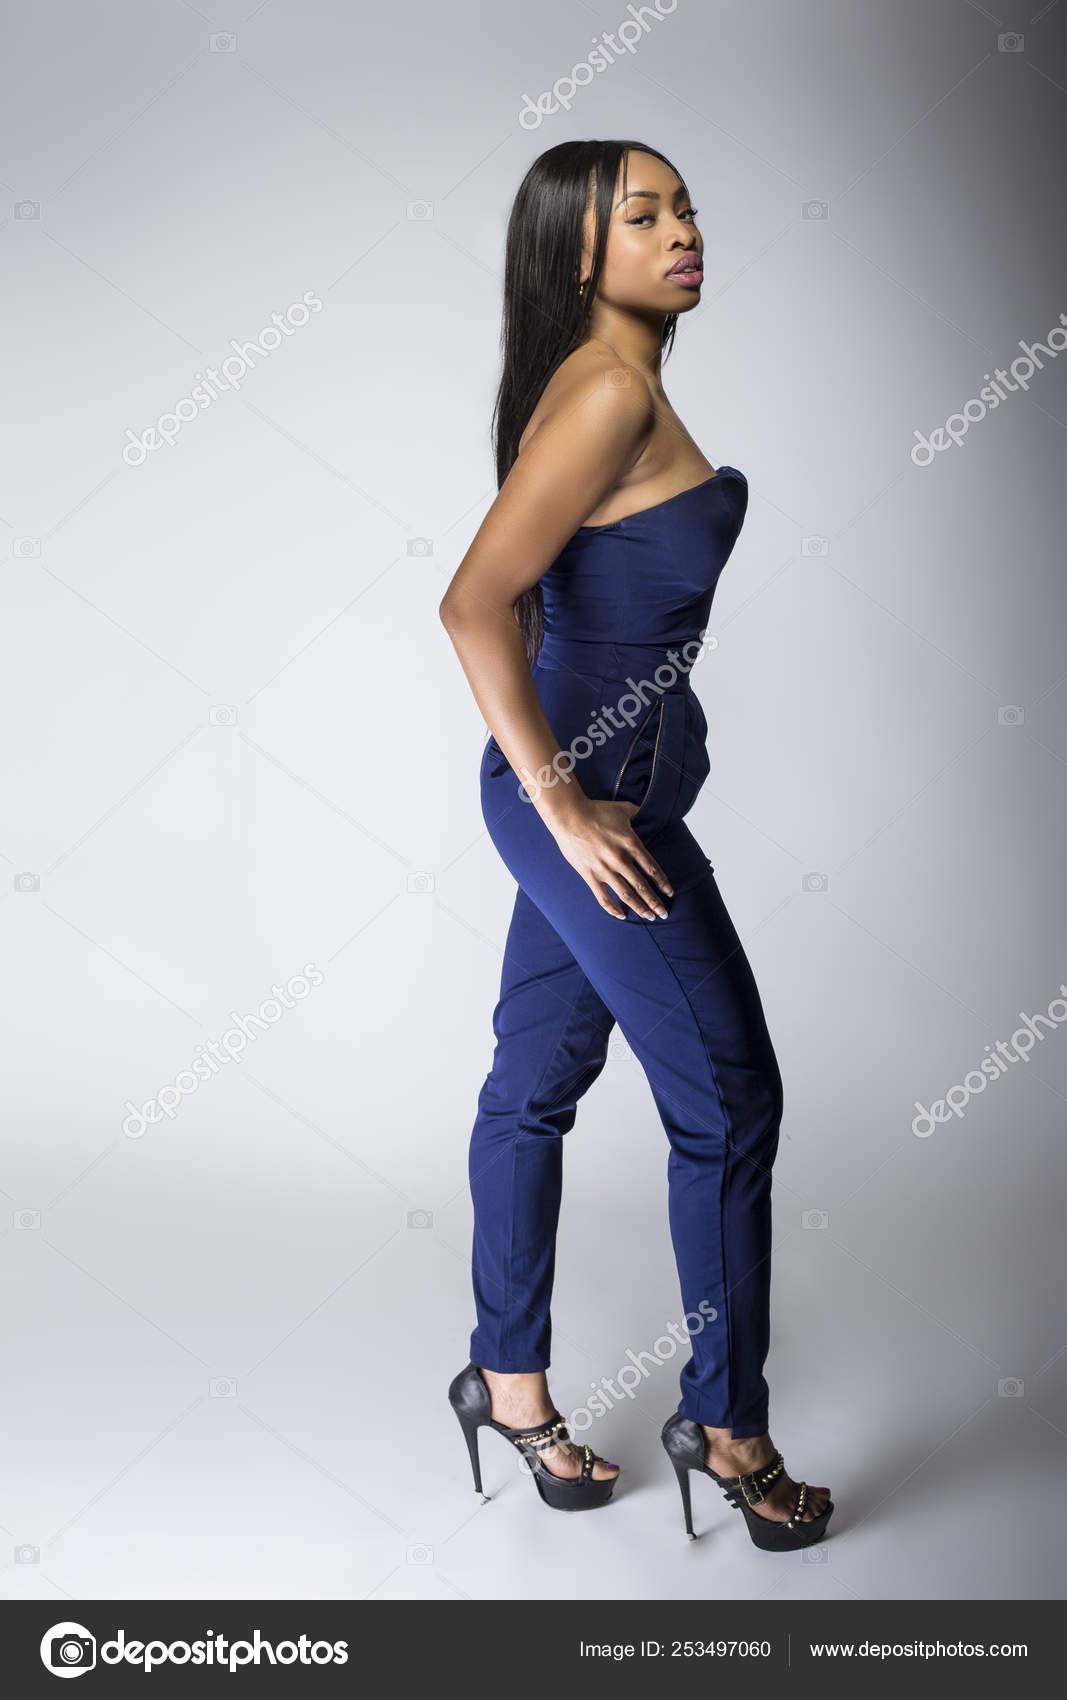 Sexy Black Female Fashion Model Wearing Apparel Blue Pants Outfit